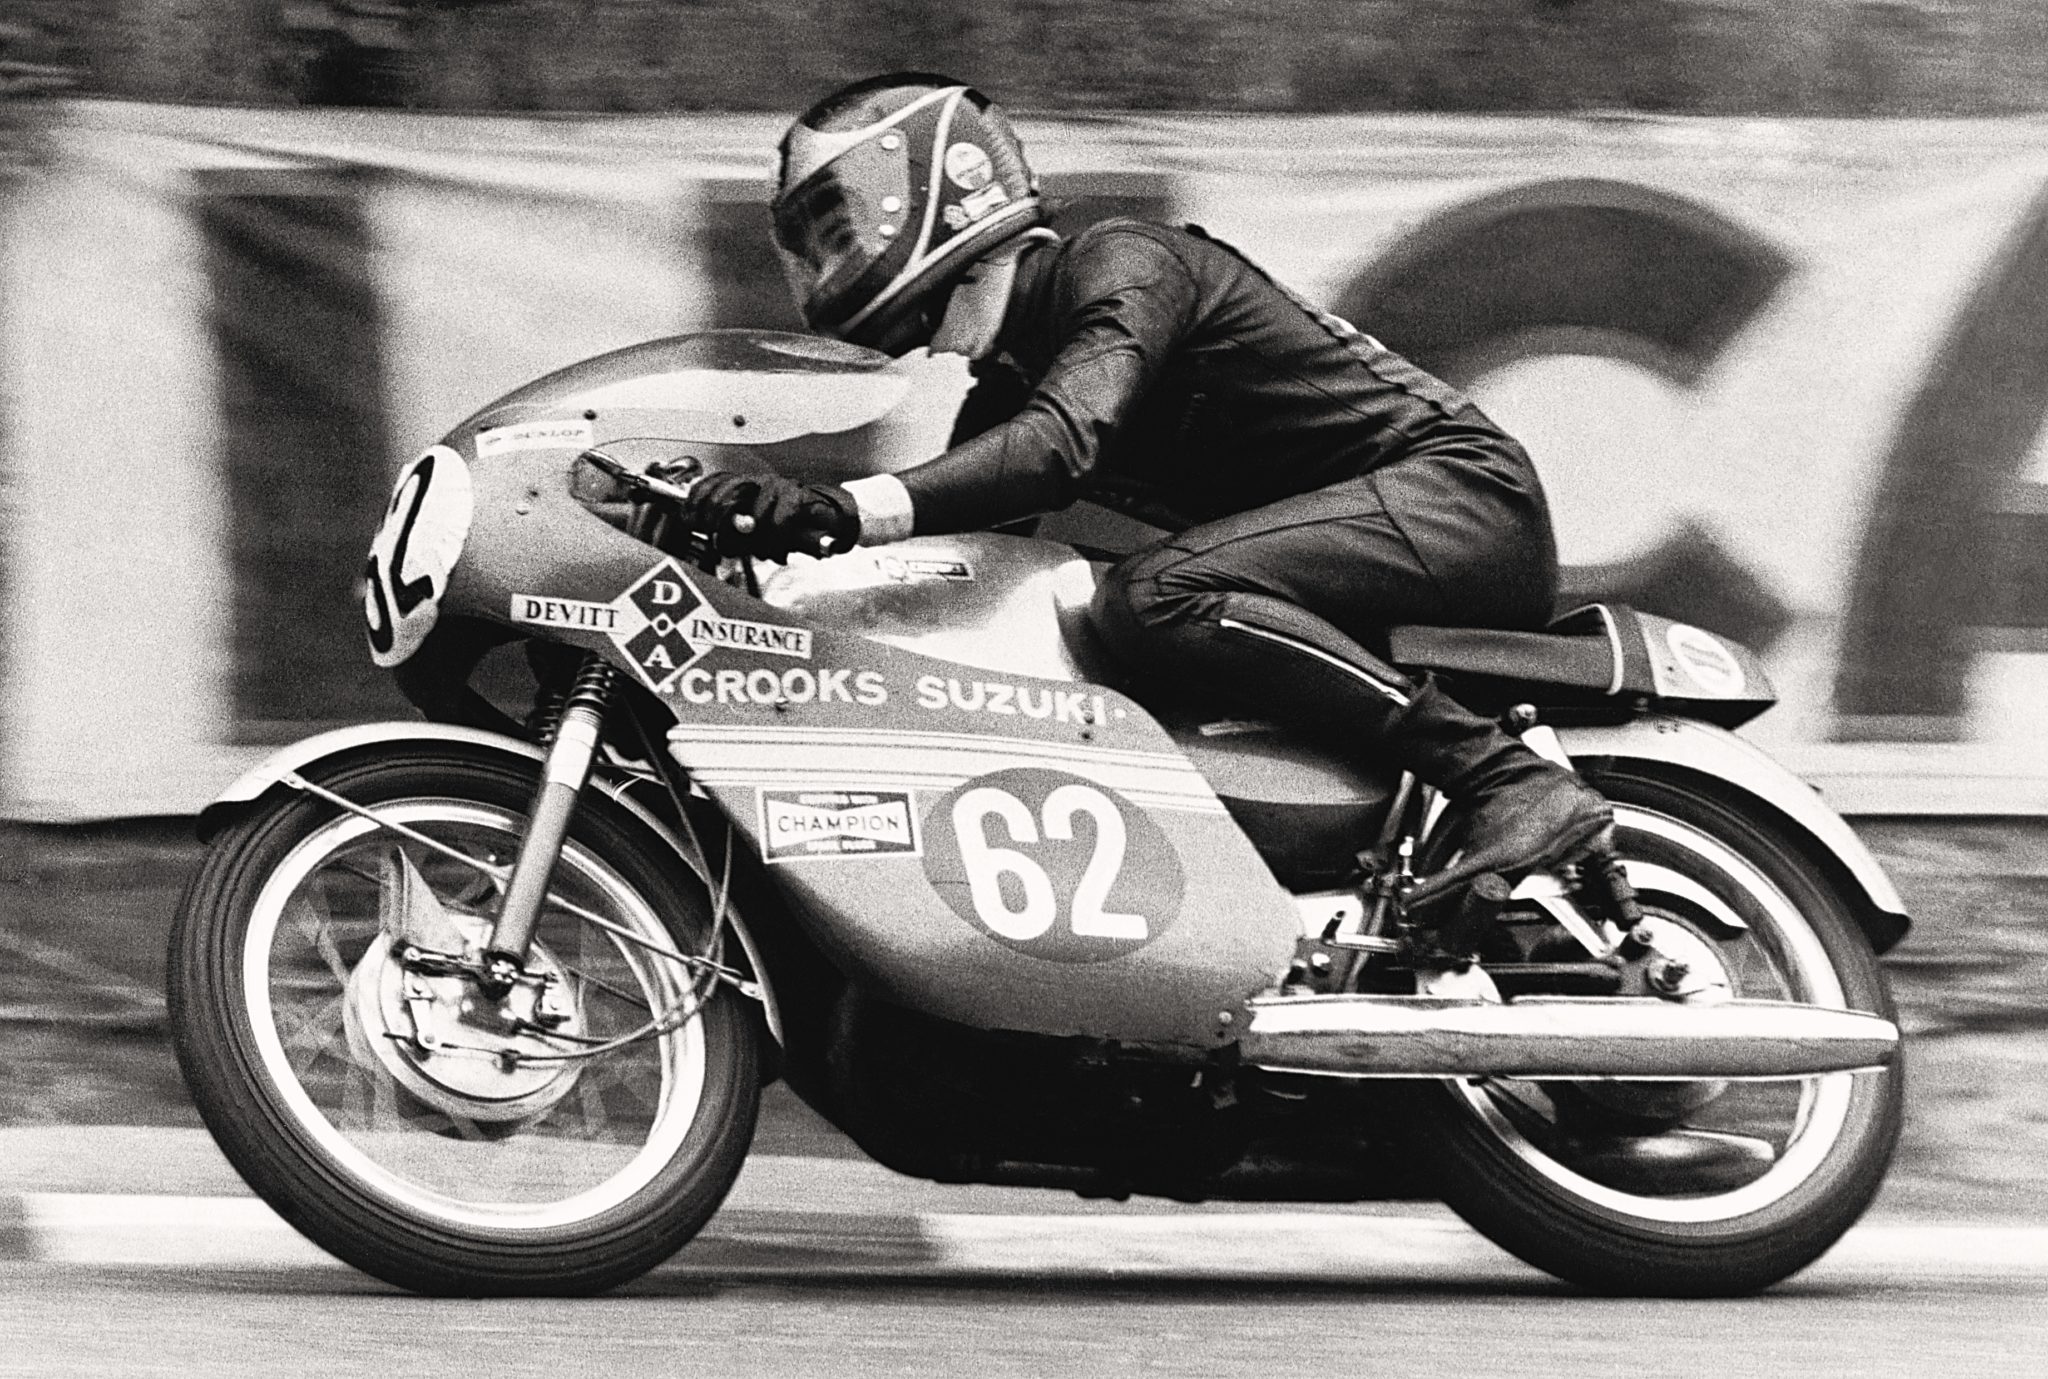 Sheene during the one and only year he raced at the Isle of Man TT 1971.